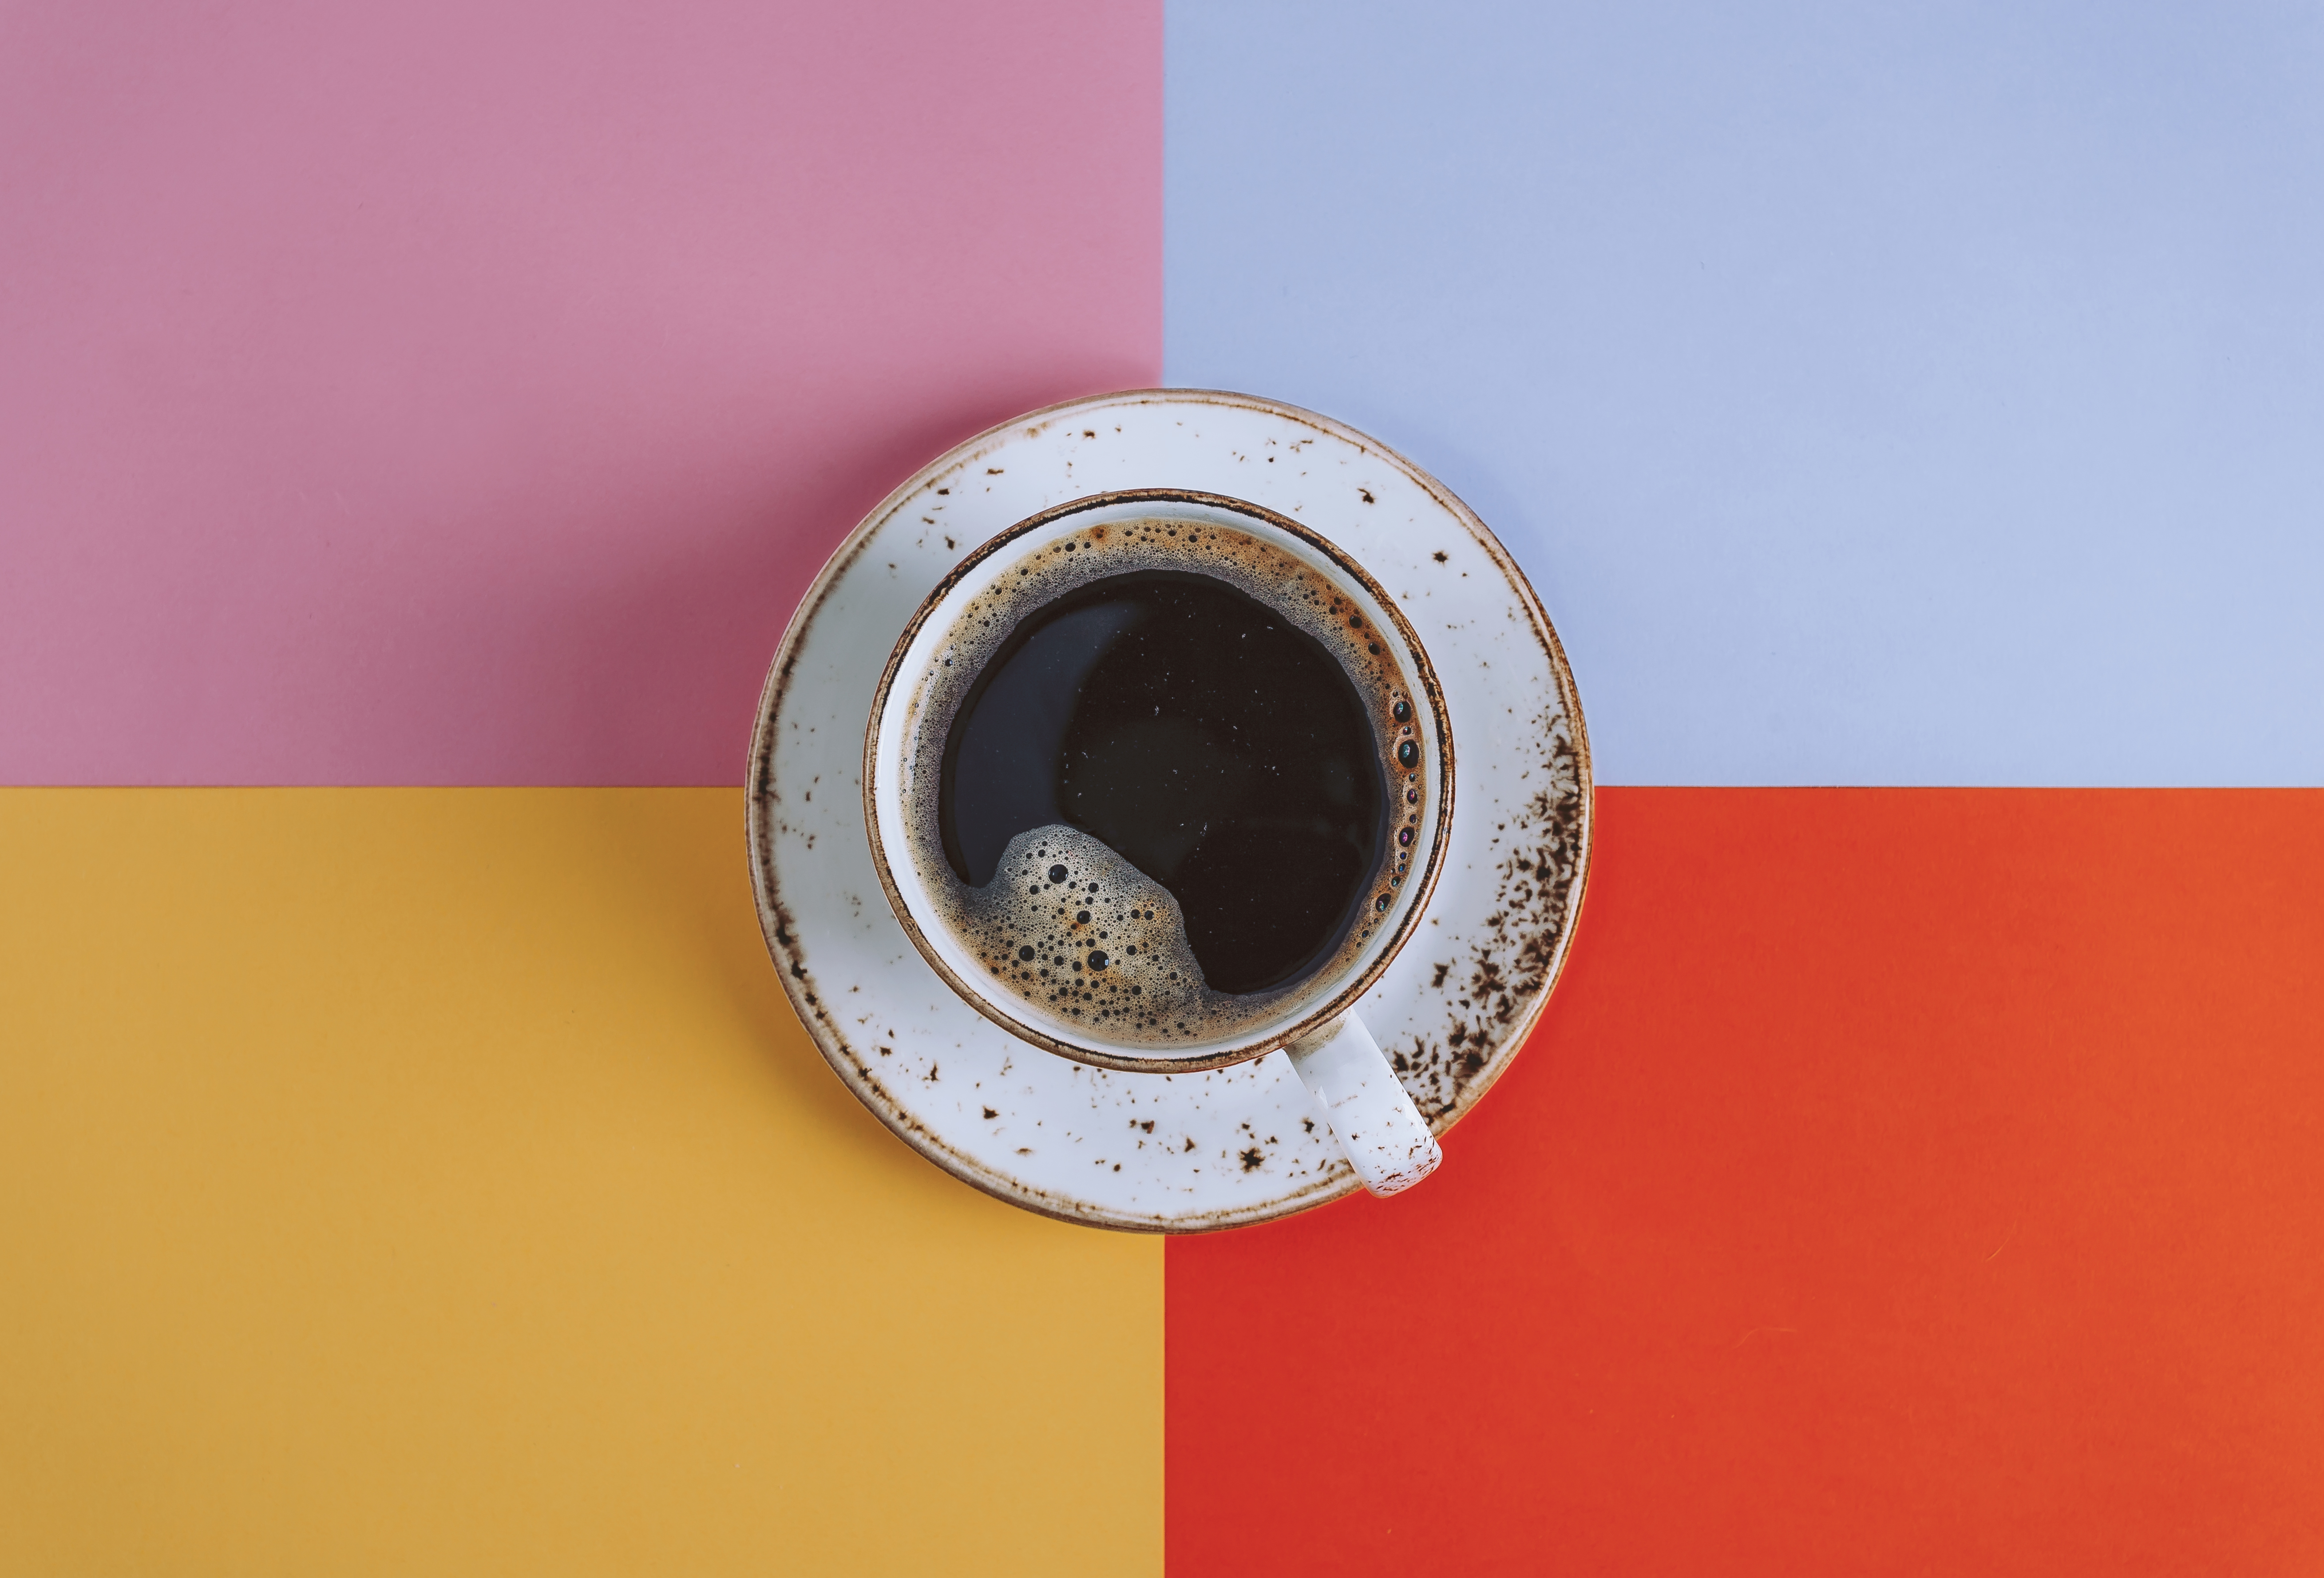 A cup of coffee against a multi-colored background.